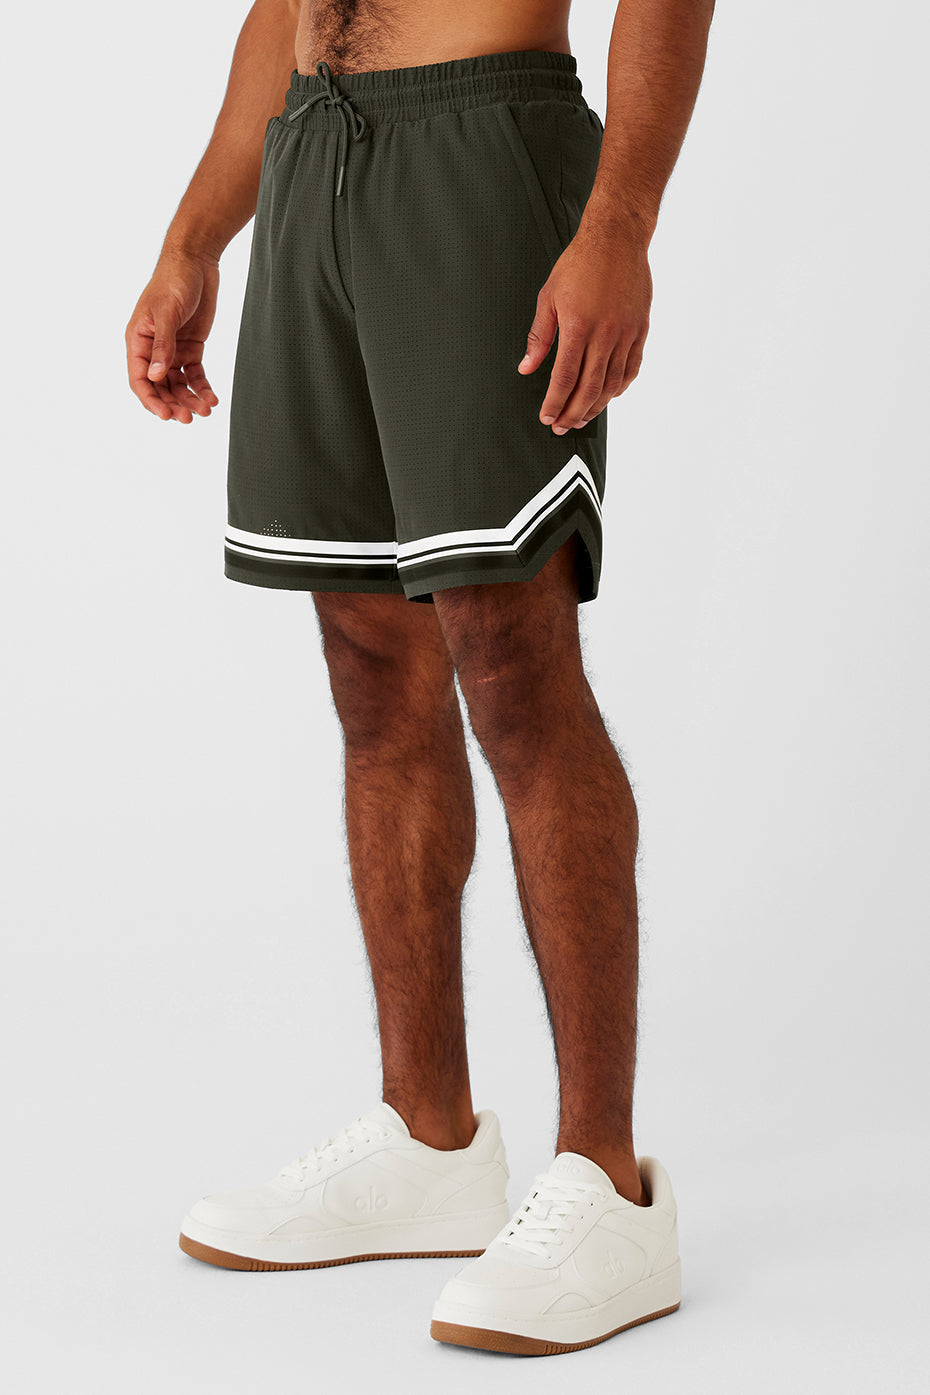 9' Traction Arena Short - Stealth Green